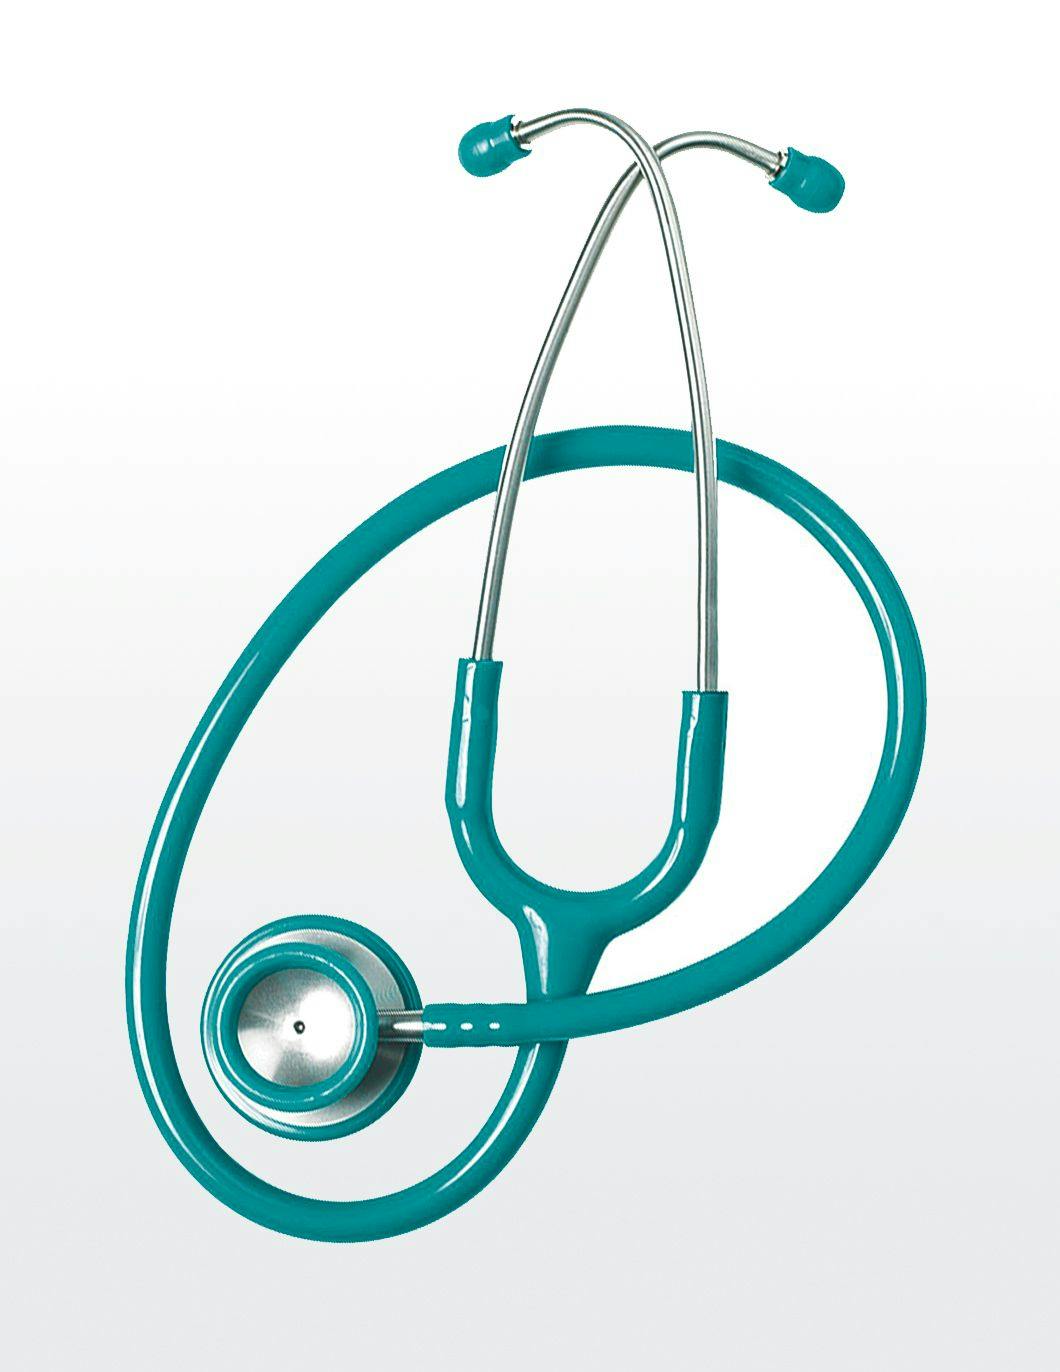 traditional-stethoscope-teal